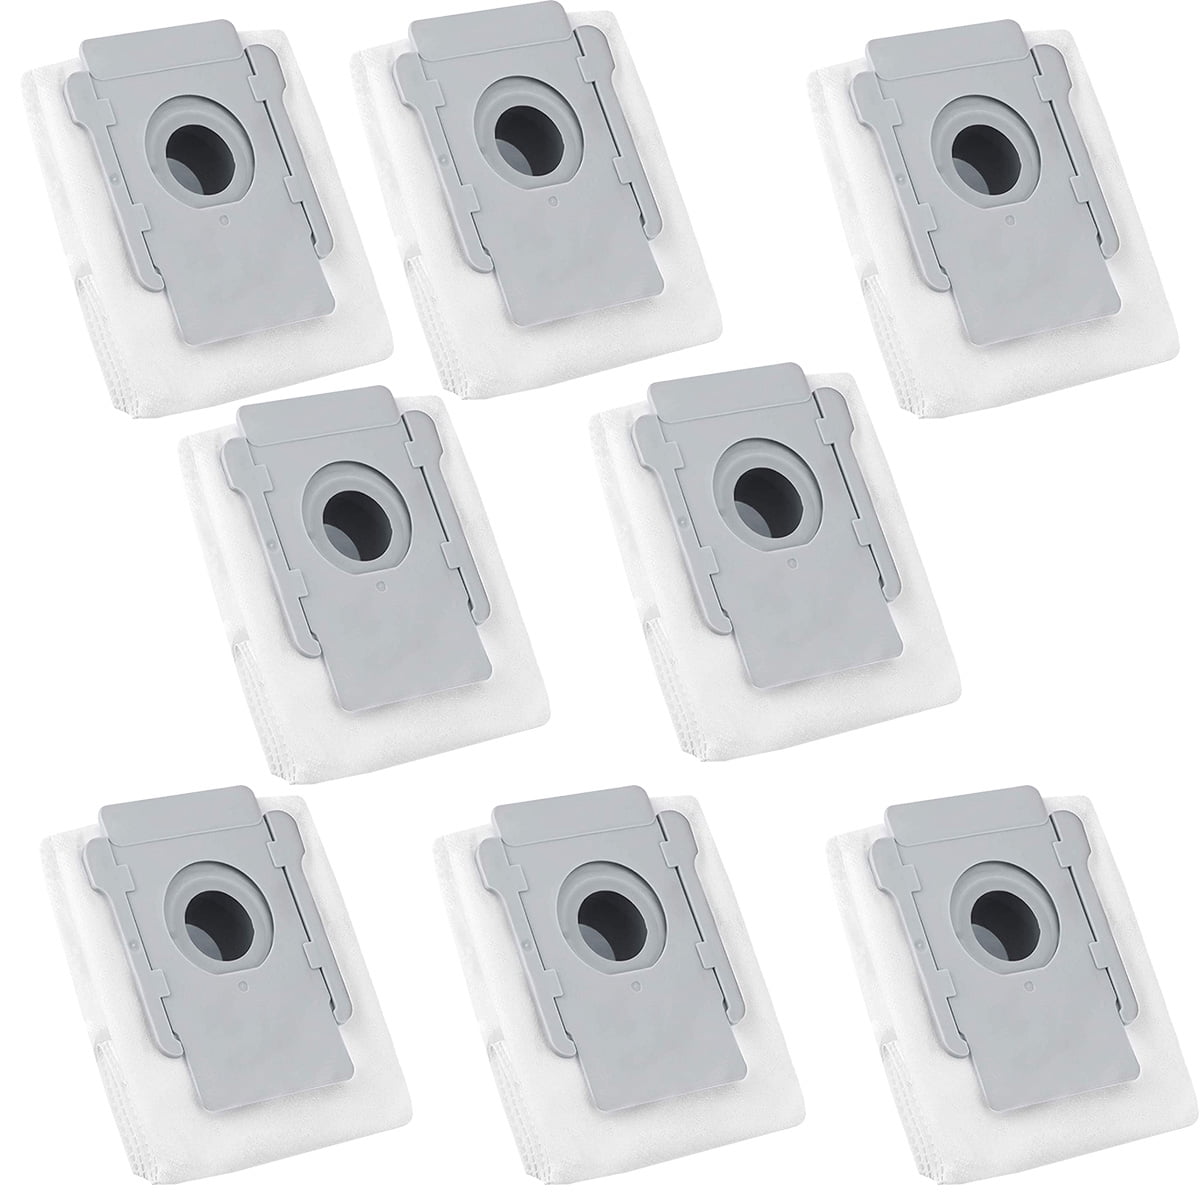 8pcs Dust Bags For IRobot Roomba S9 Clean Base Vacuum Cleaner Parts Accessory 